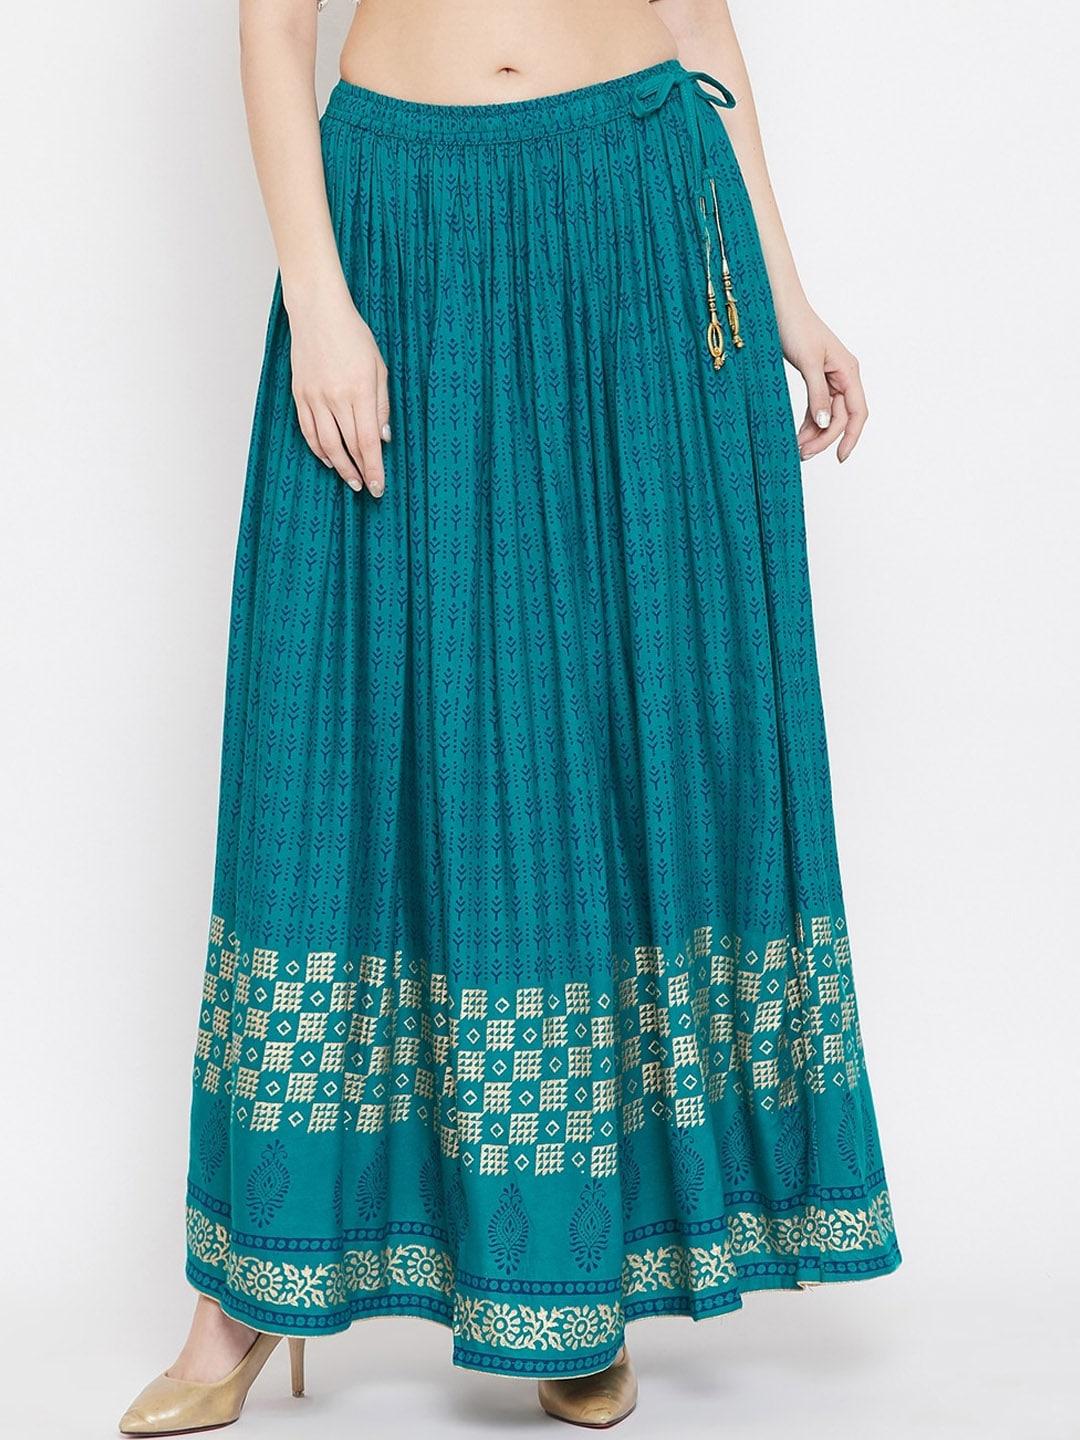 Clora Creation Women Teal Blue & Gold-Colored Geometric Printed Flared Maxi Skirt